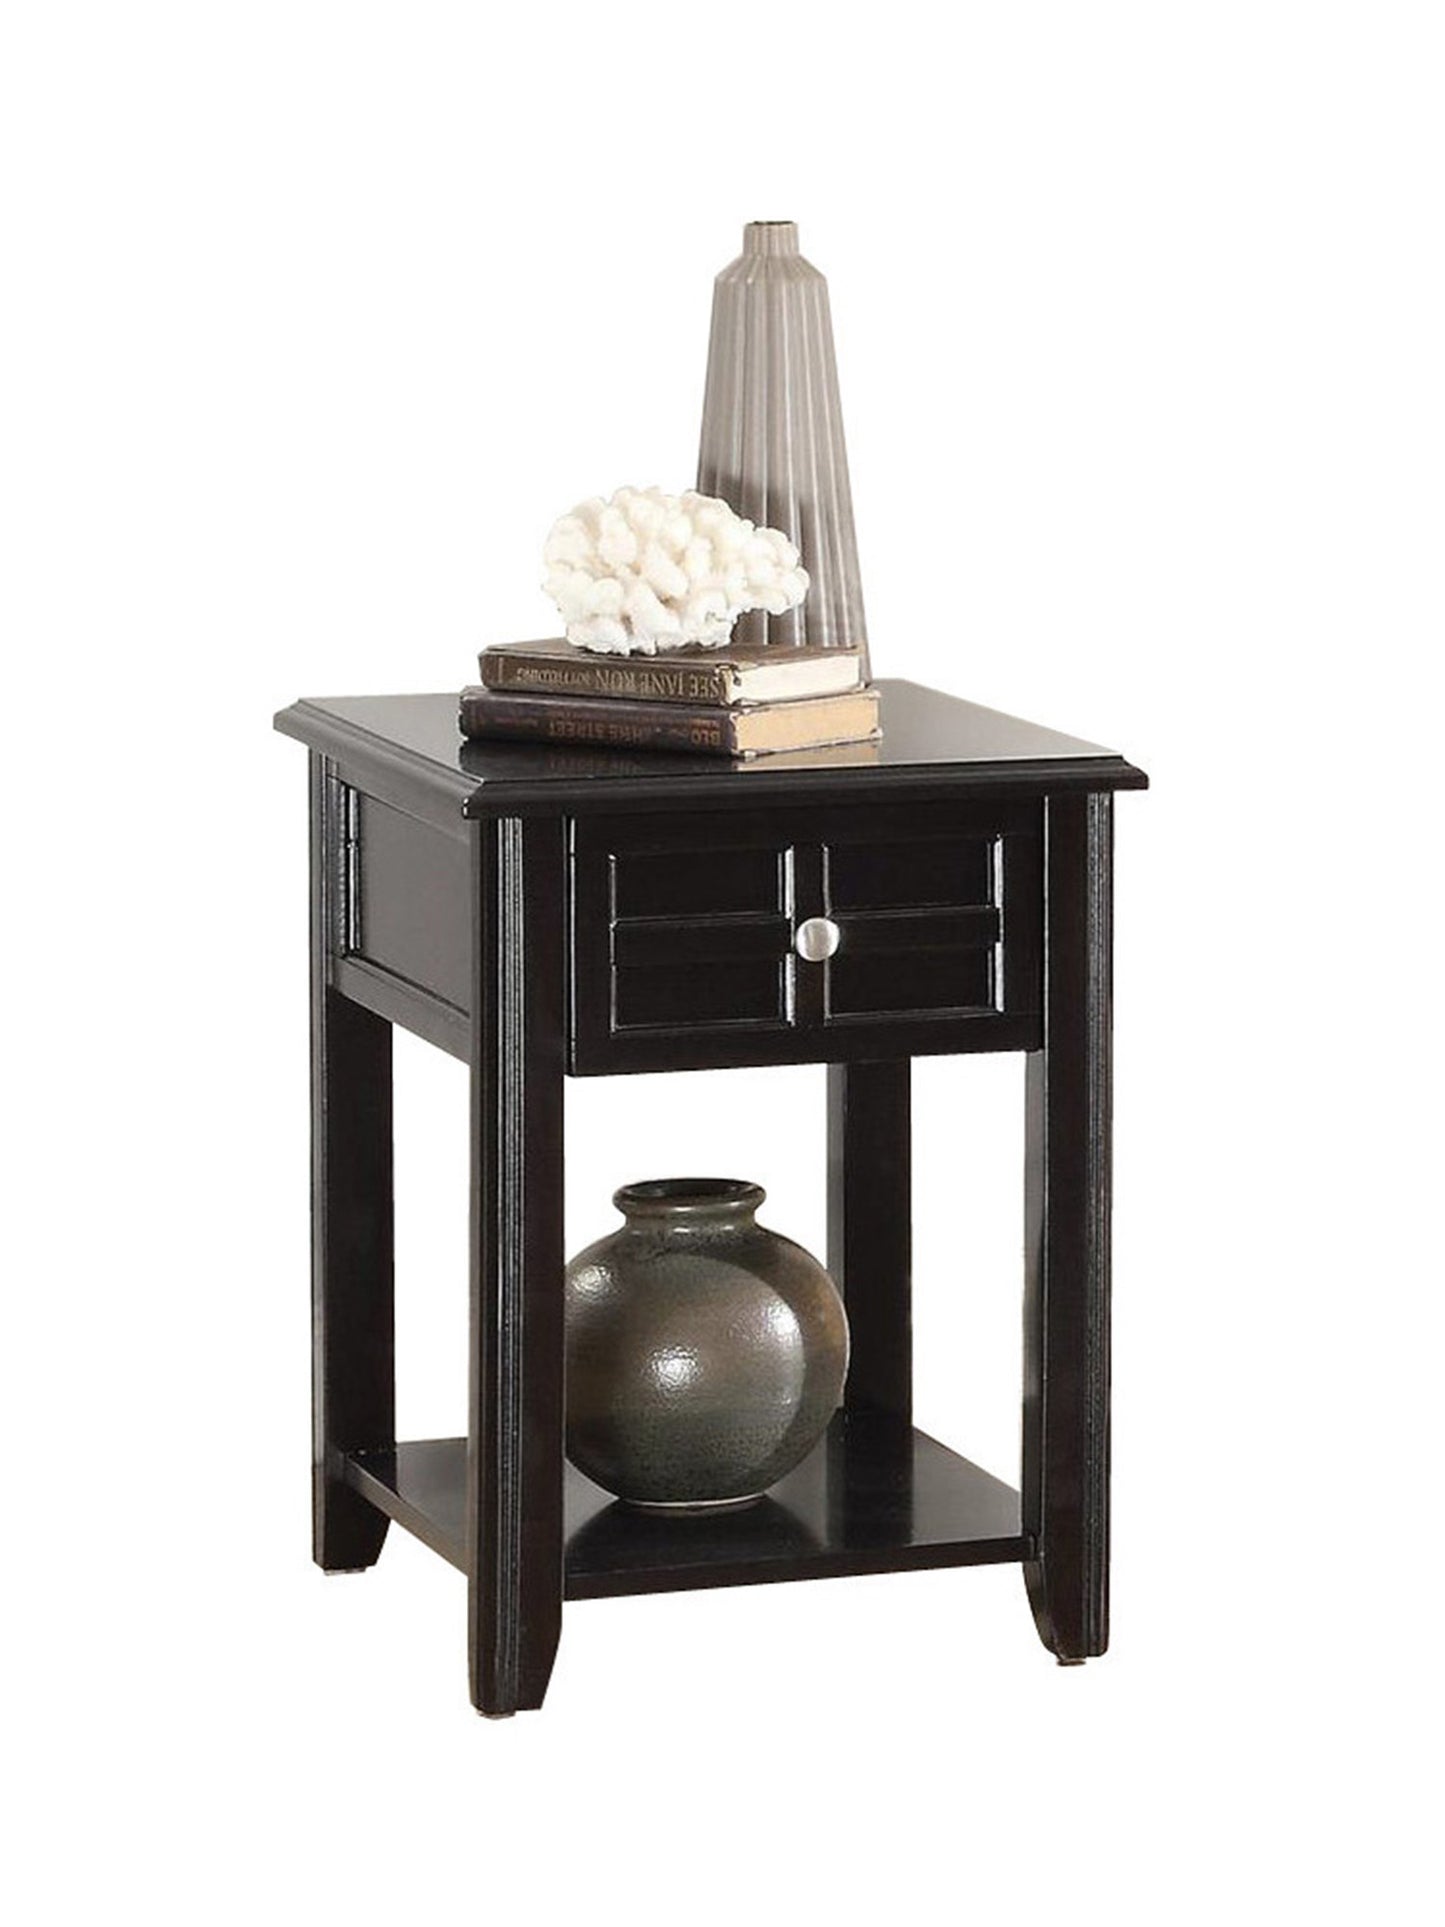 Homelegance Carrier Chair Table with Functional Drawer in Dark Espresso